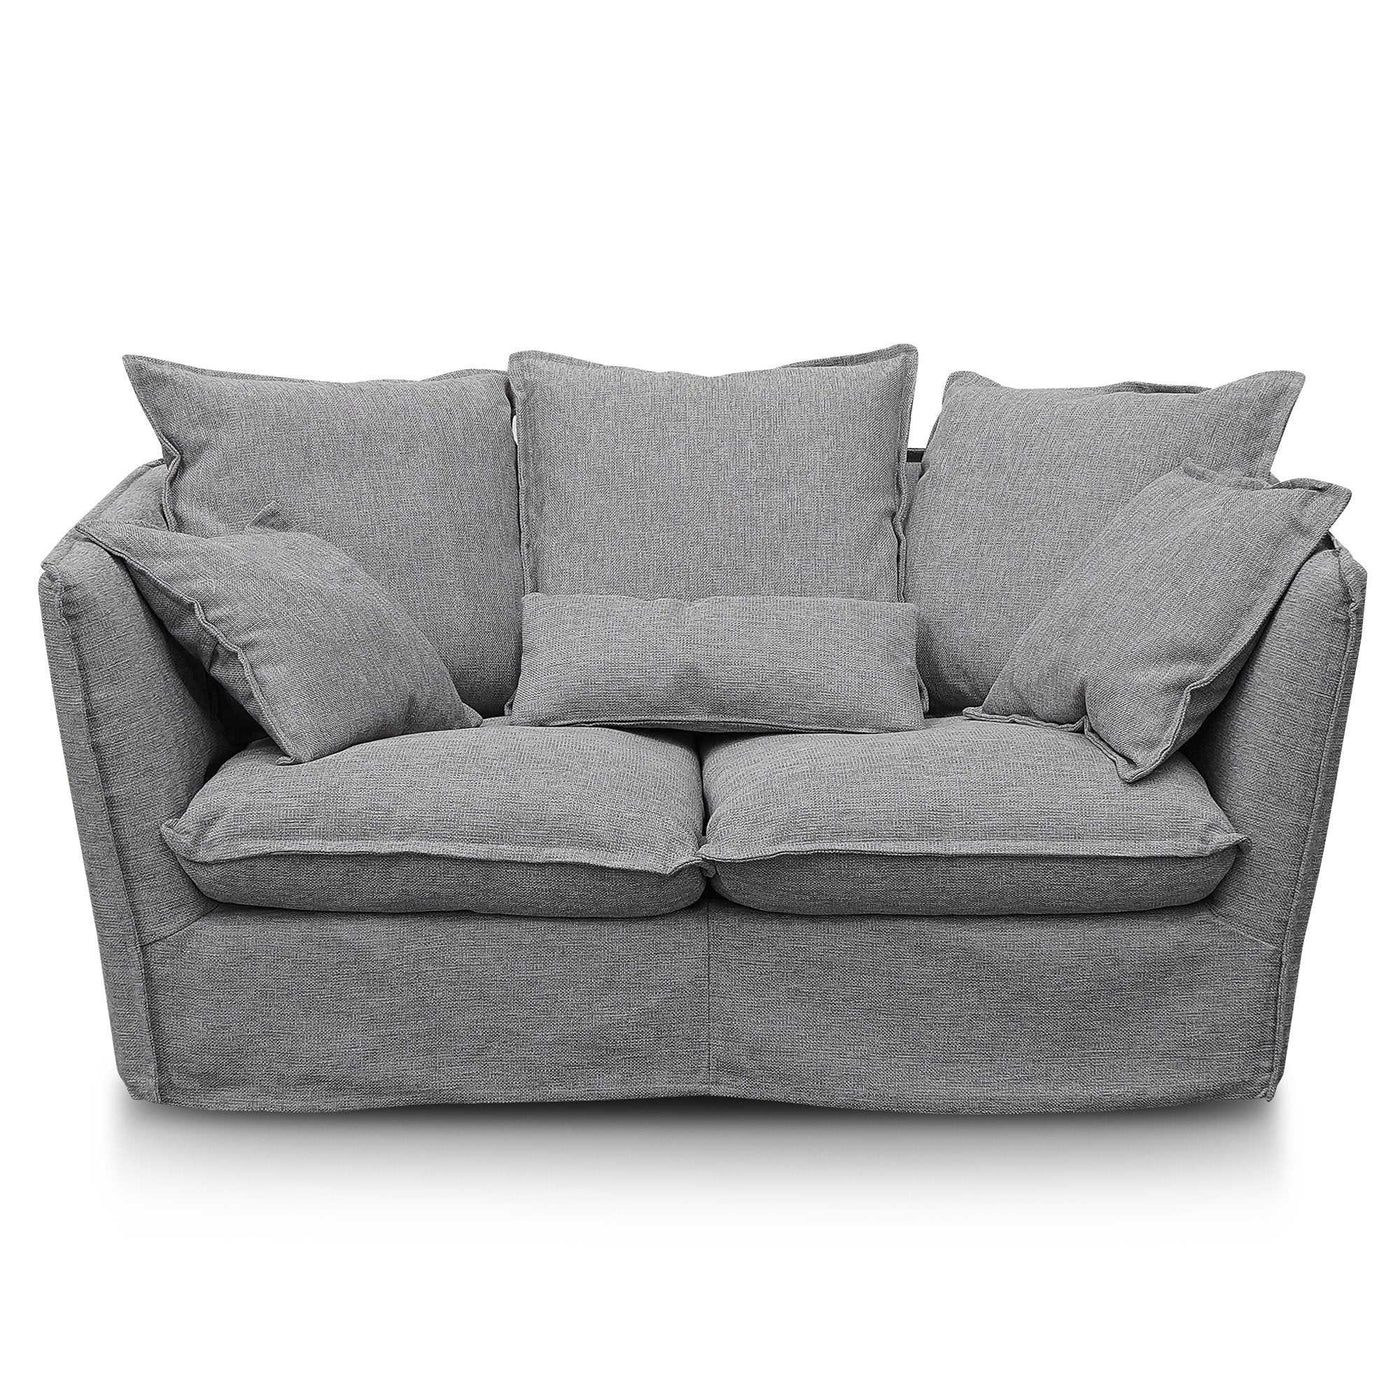 2 Seater Sofa - French Grey